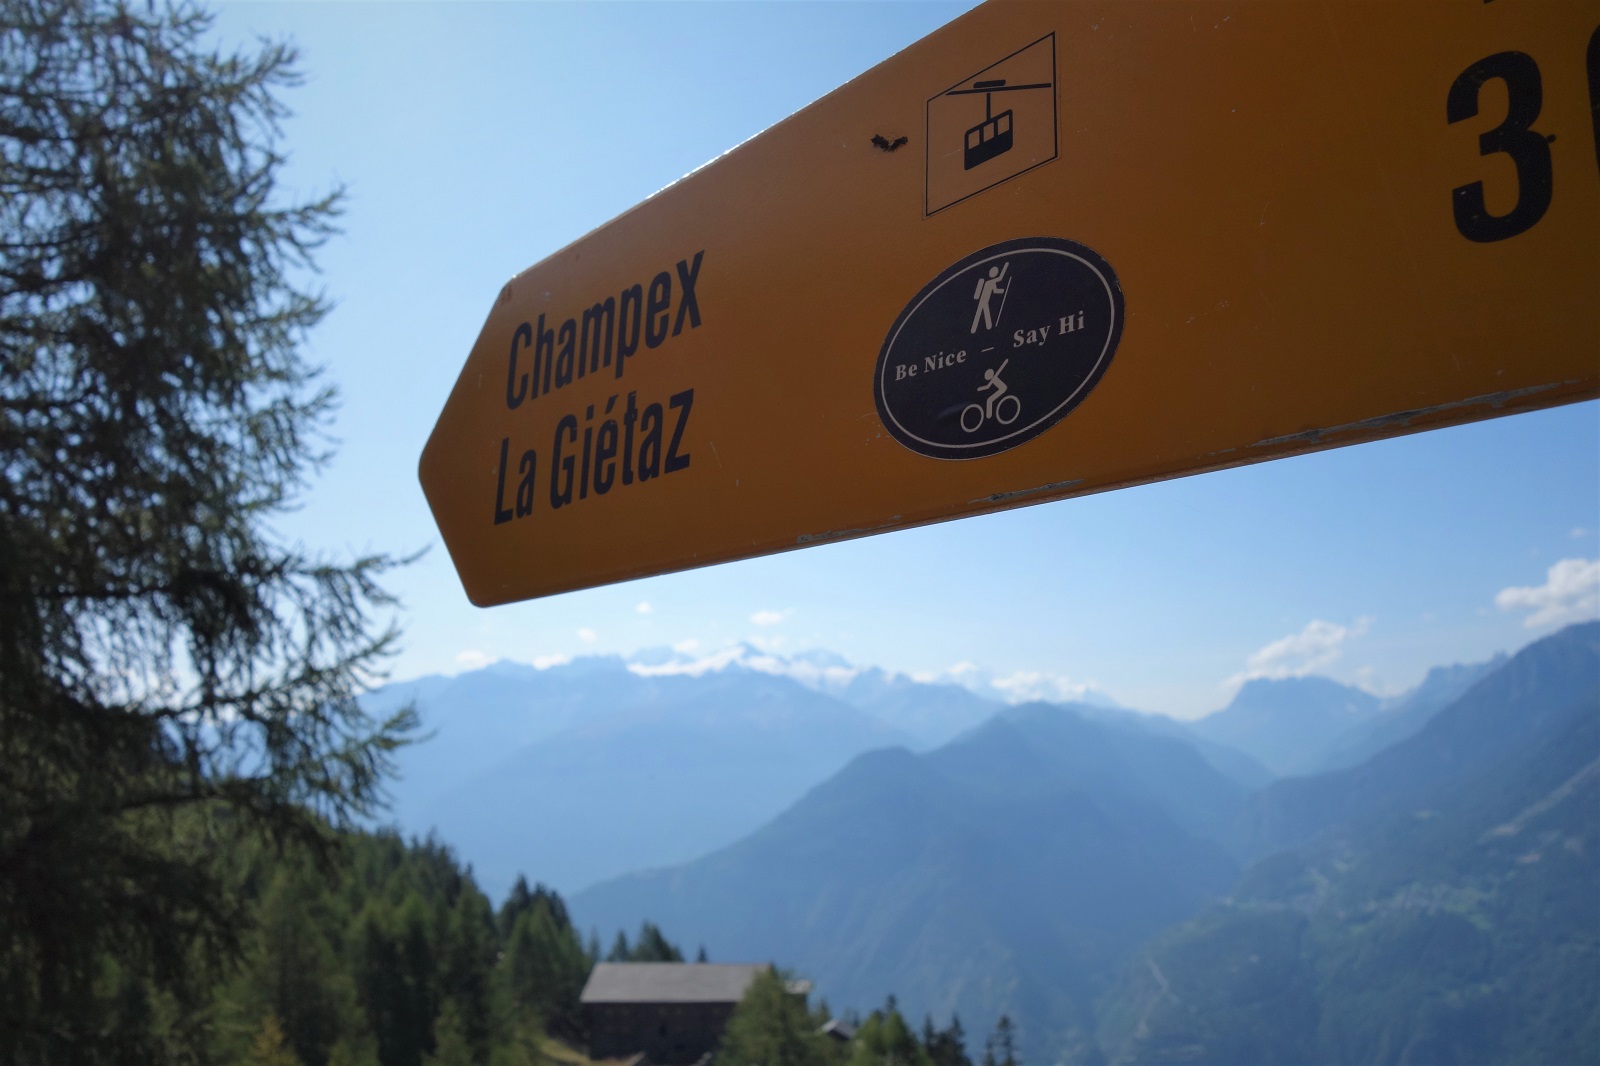 Pedal back up hill this way for the telecabine. Oh look, Mont Blanc.